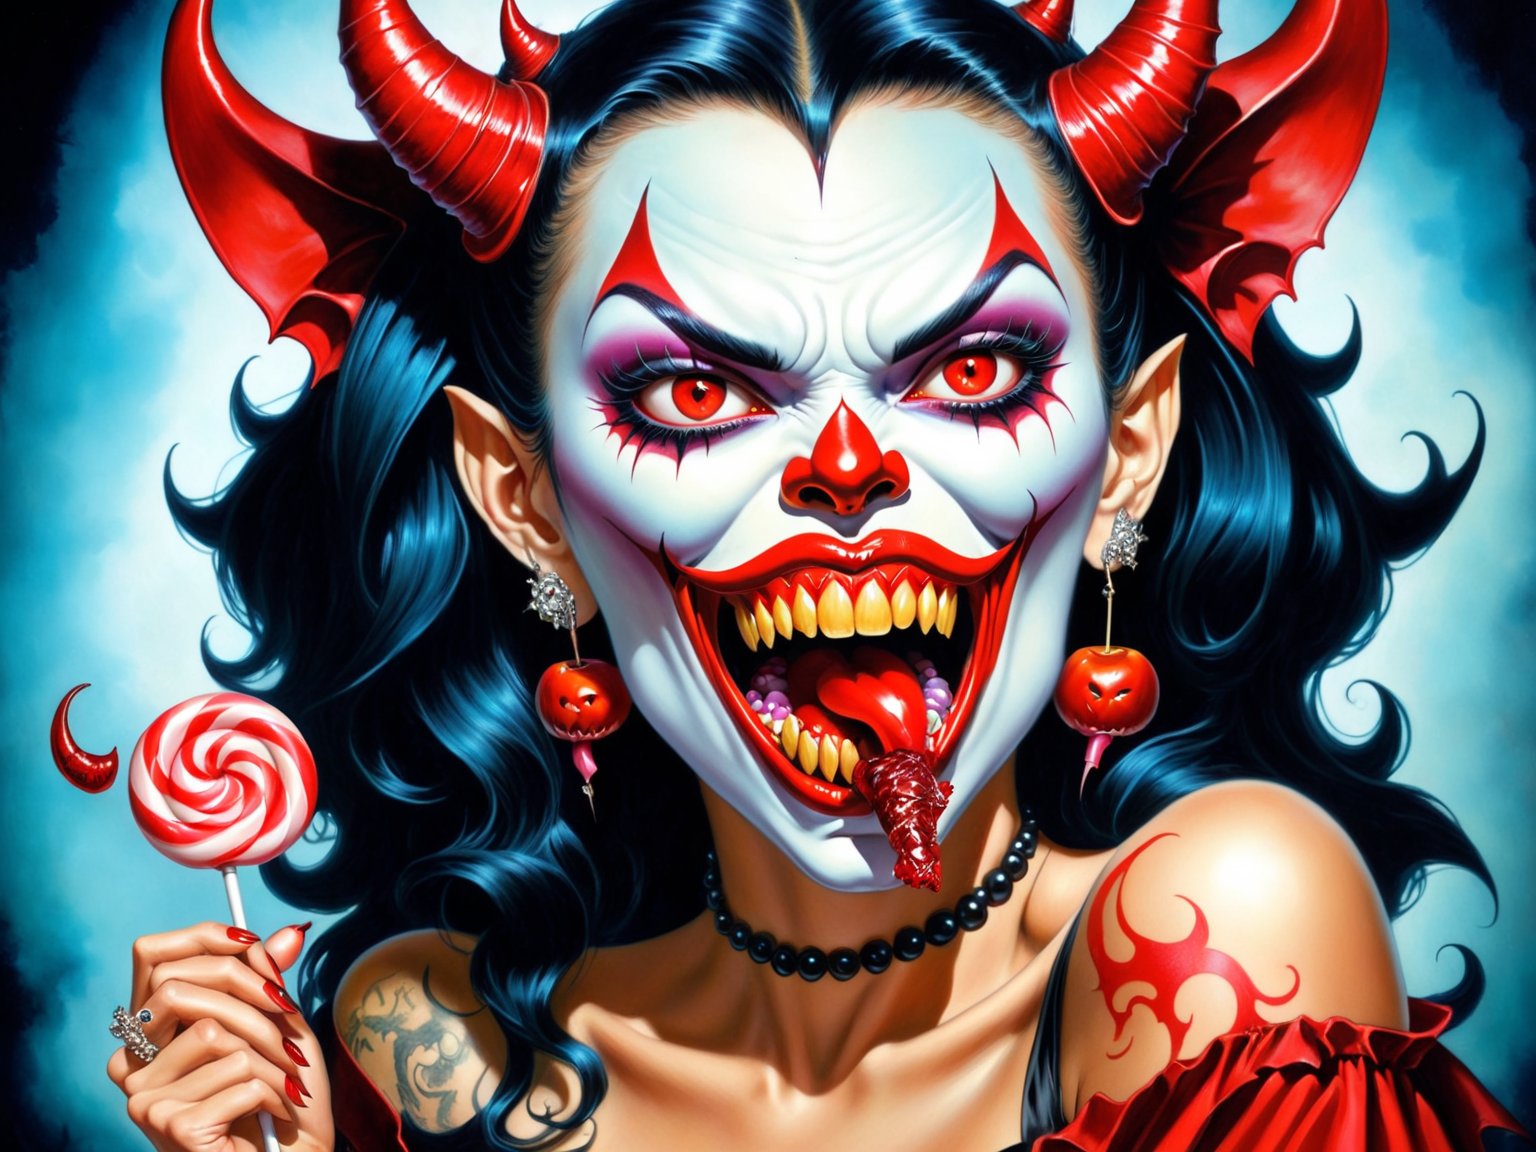 arafed woman with a devil tattoo and a candy in her mouth, demon girl, demon woman, boris villejo, boris villajo, demoness, portrait of demon girl, lowbrow art, saturno butto. occult art, goth clown girl, digital art - w 0, saturno butto, vampire girl, monstergirl